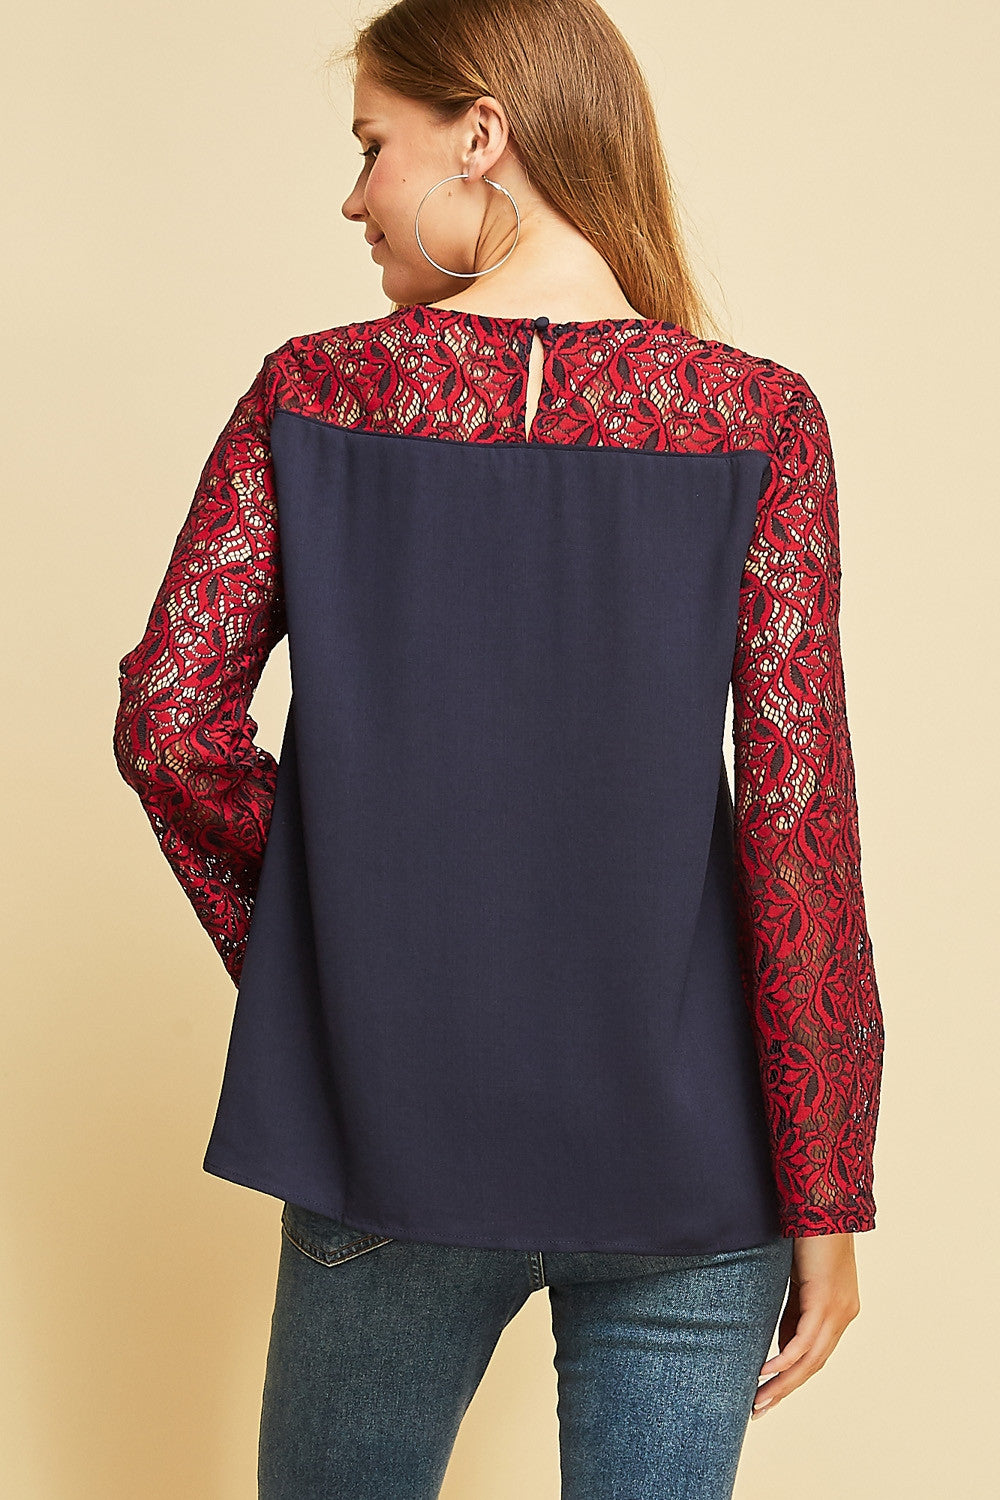 Lace Sleeve Top - 2 Colors